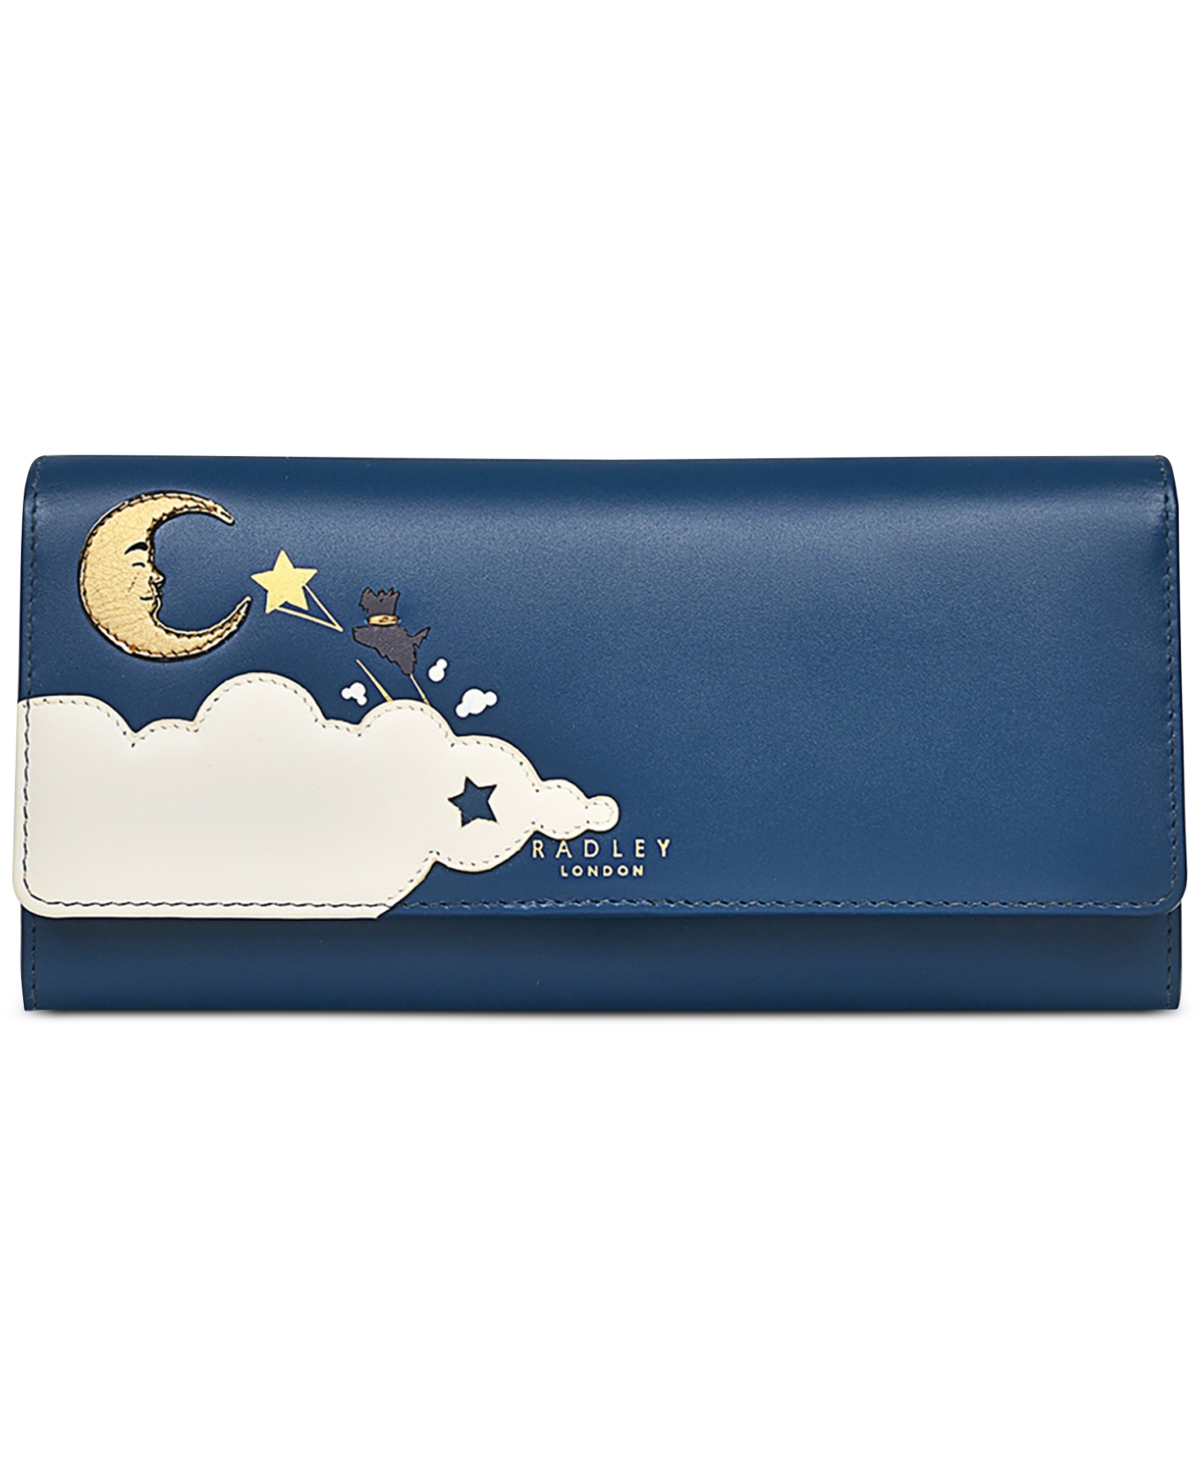 Radley London Shoot For The Moon Large Leather Flapover Wallet In Dark Teal